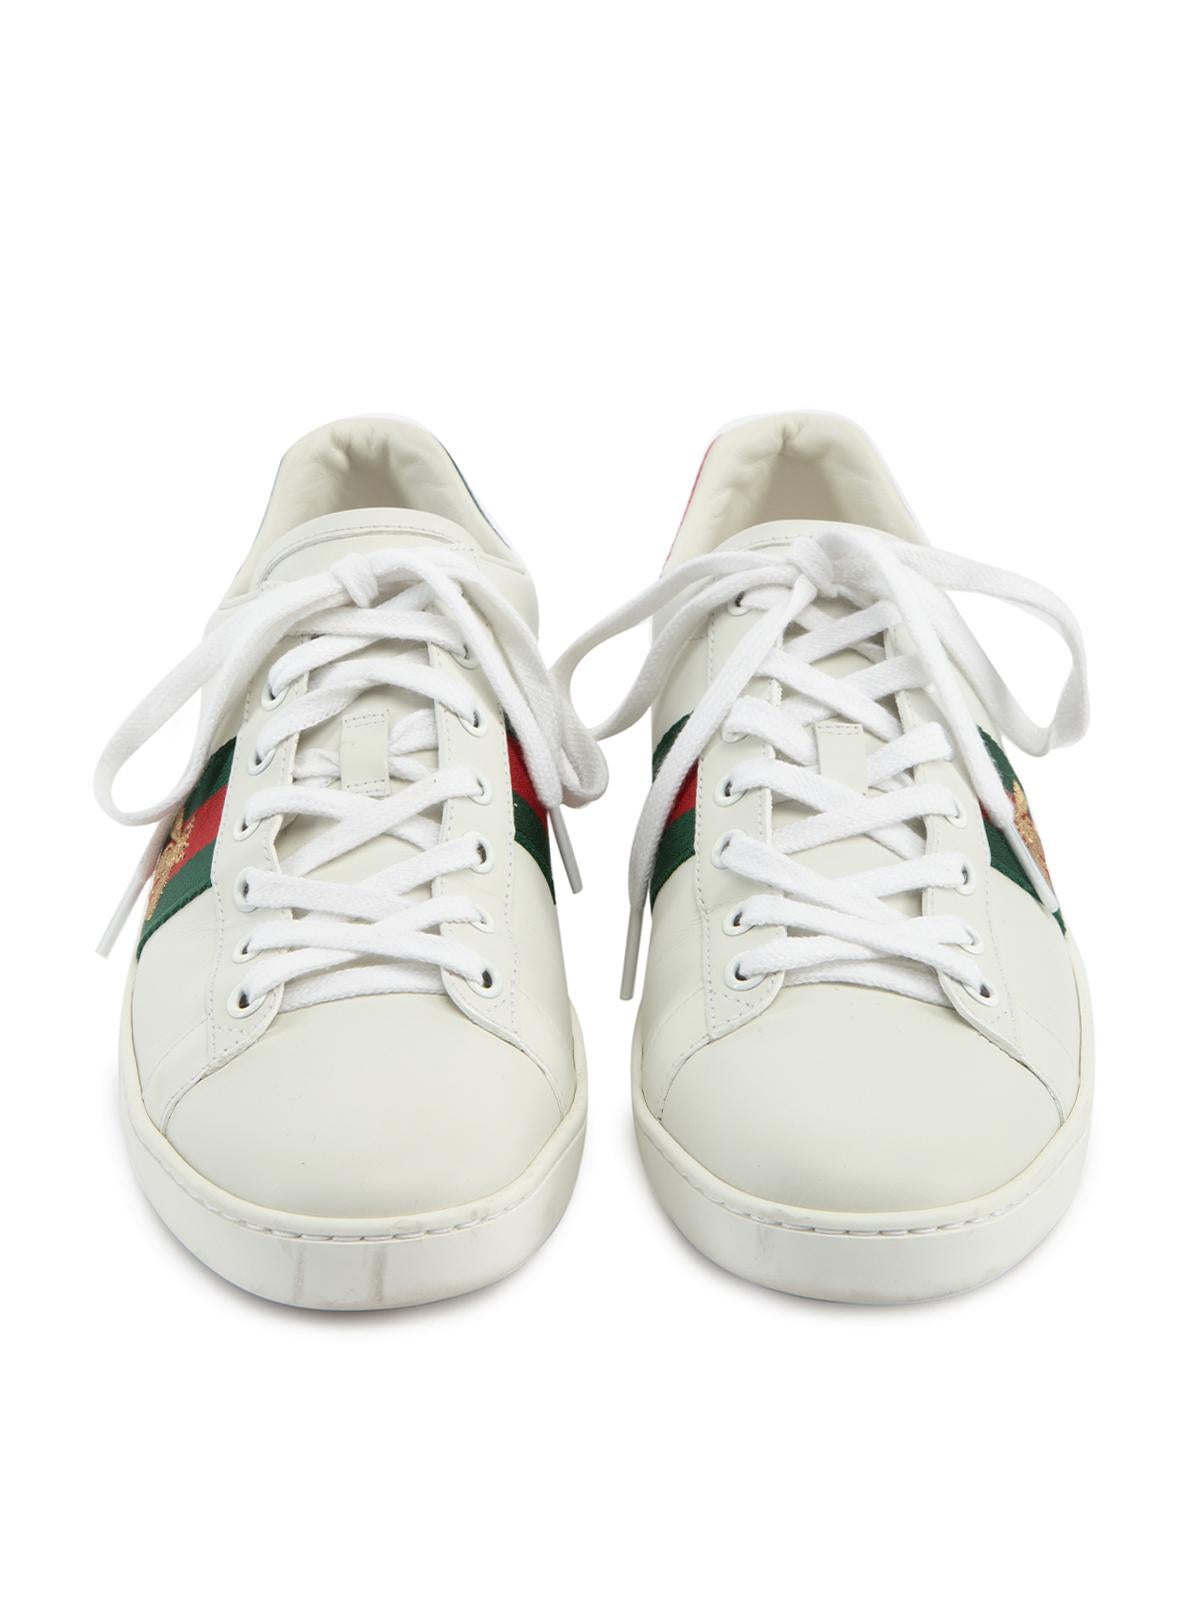 gucci loved sneakers women's